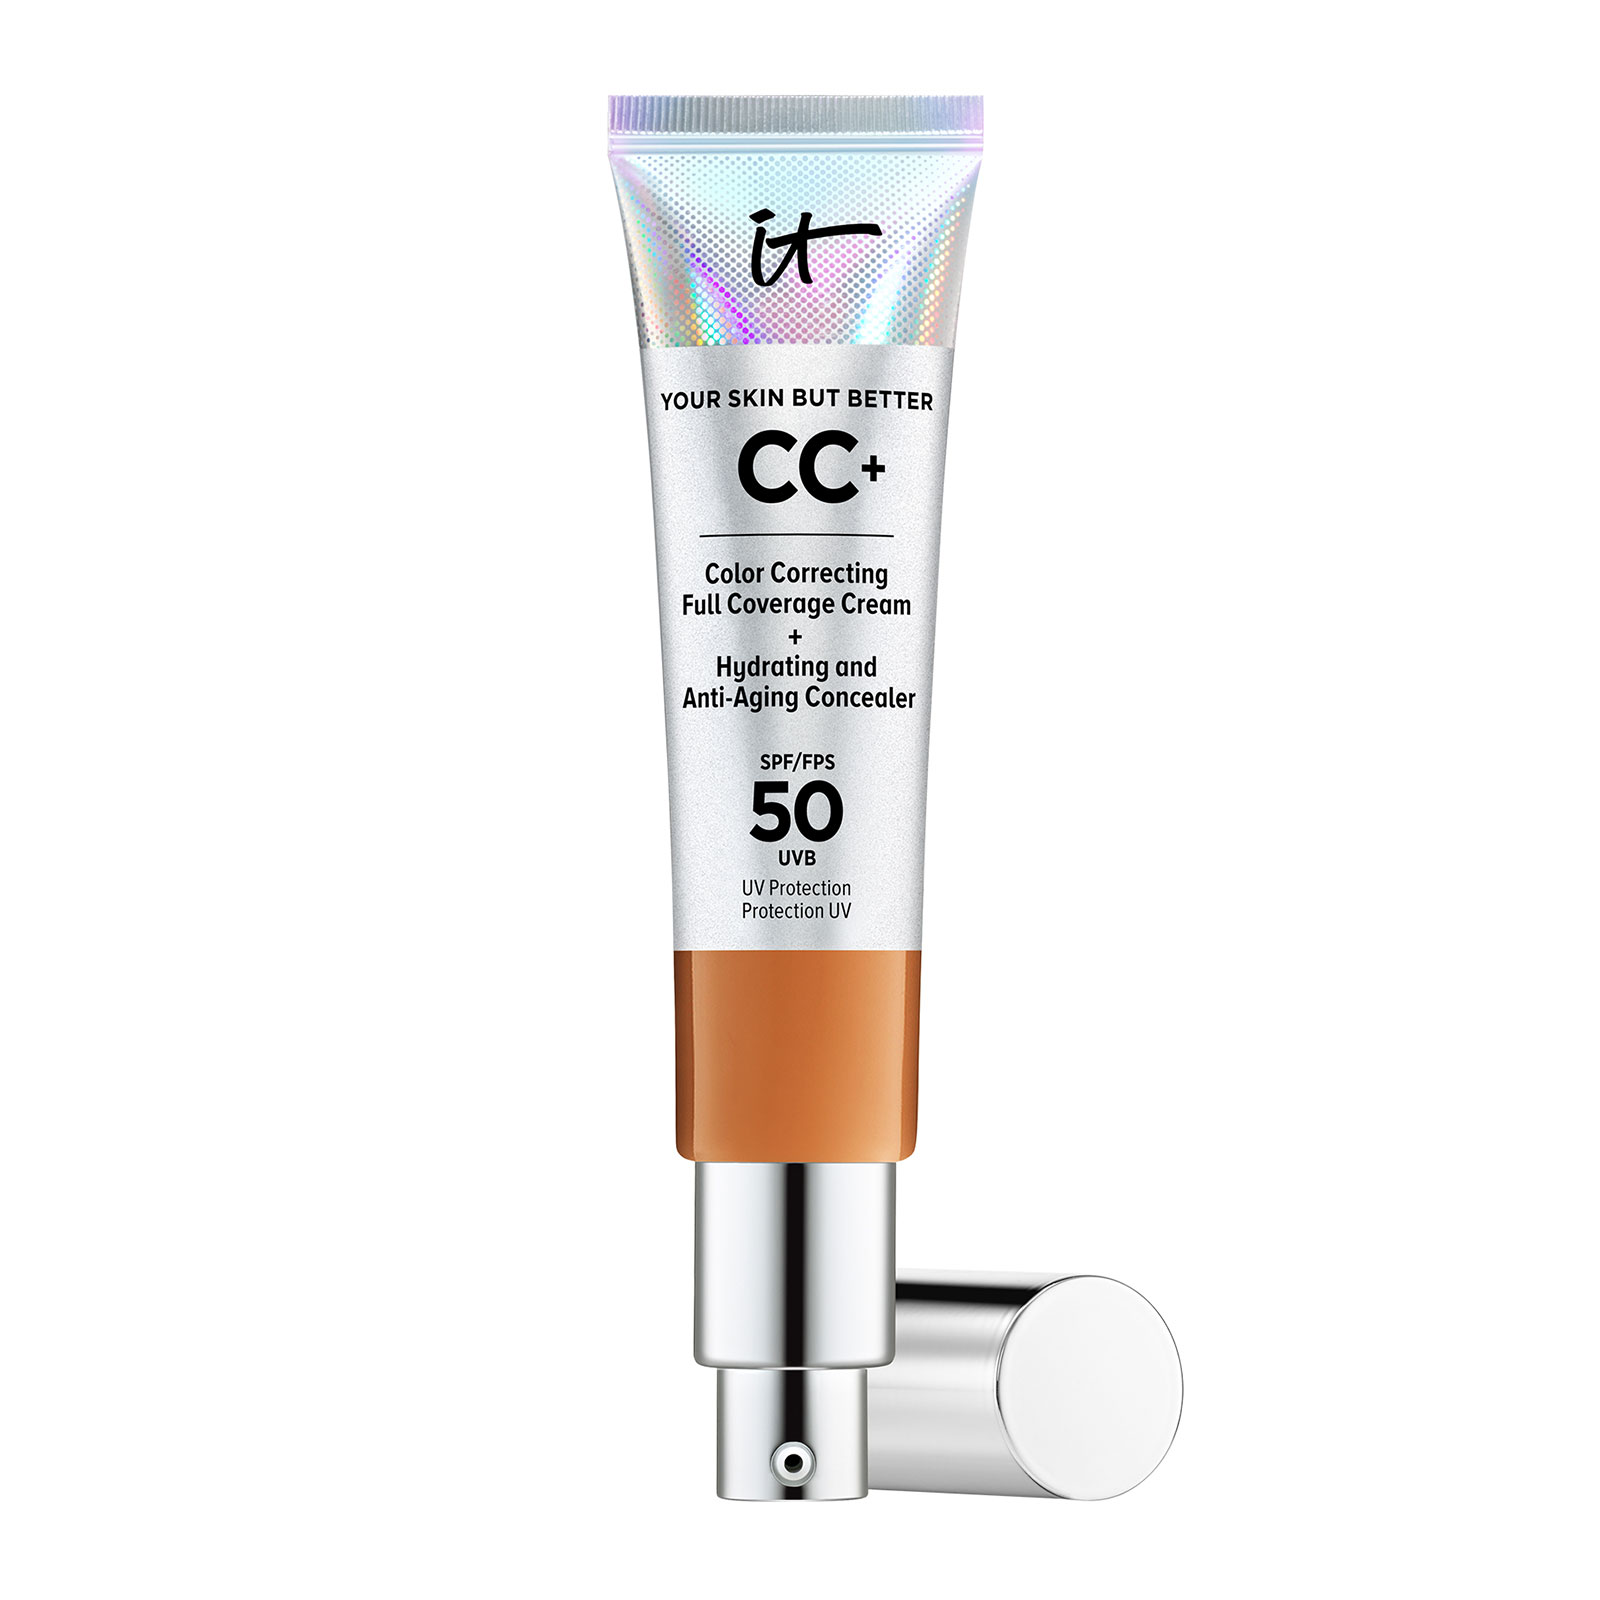 IT Cosmetics Your Skin but Better CC Color Correcting SPF50 32ml